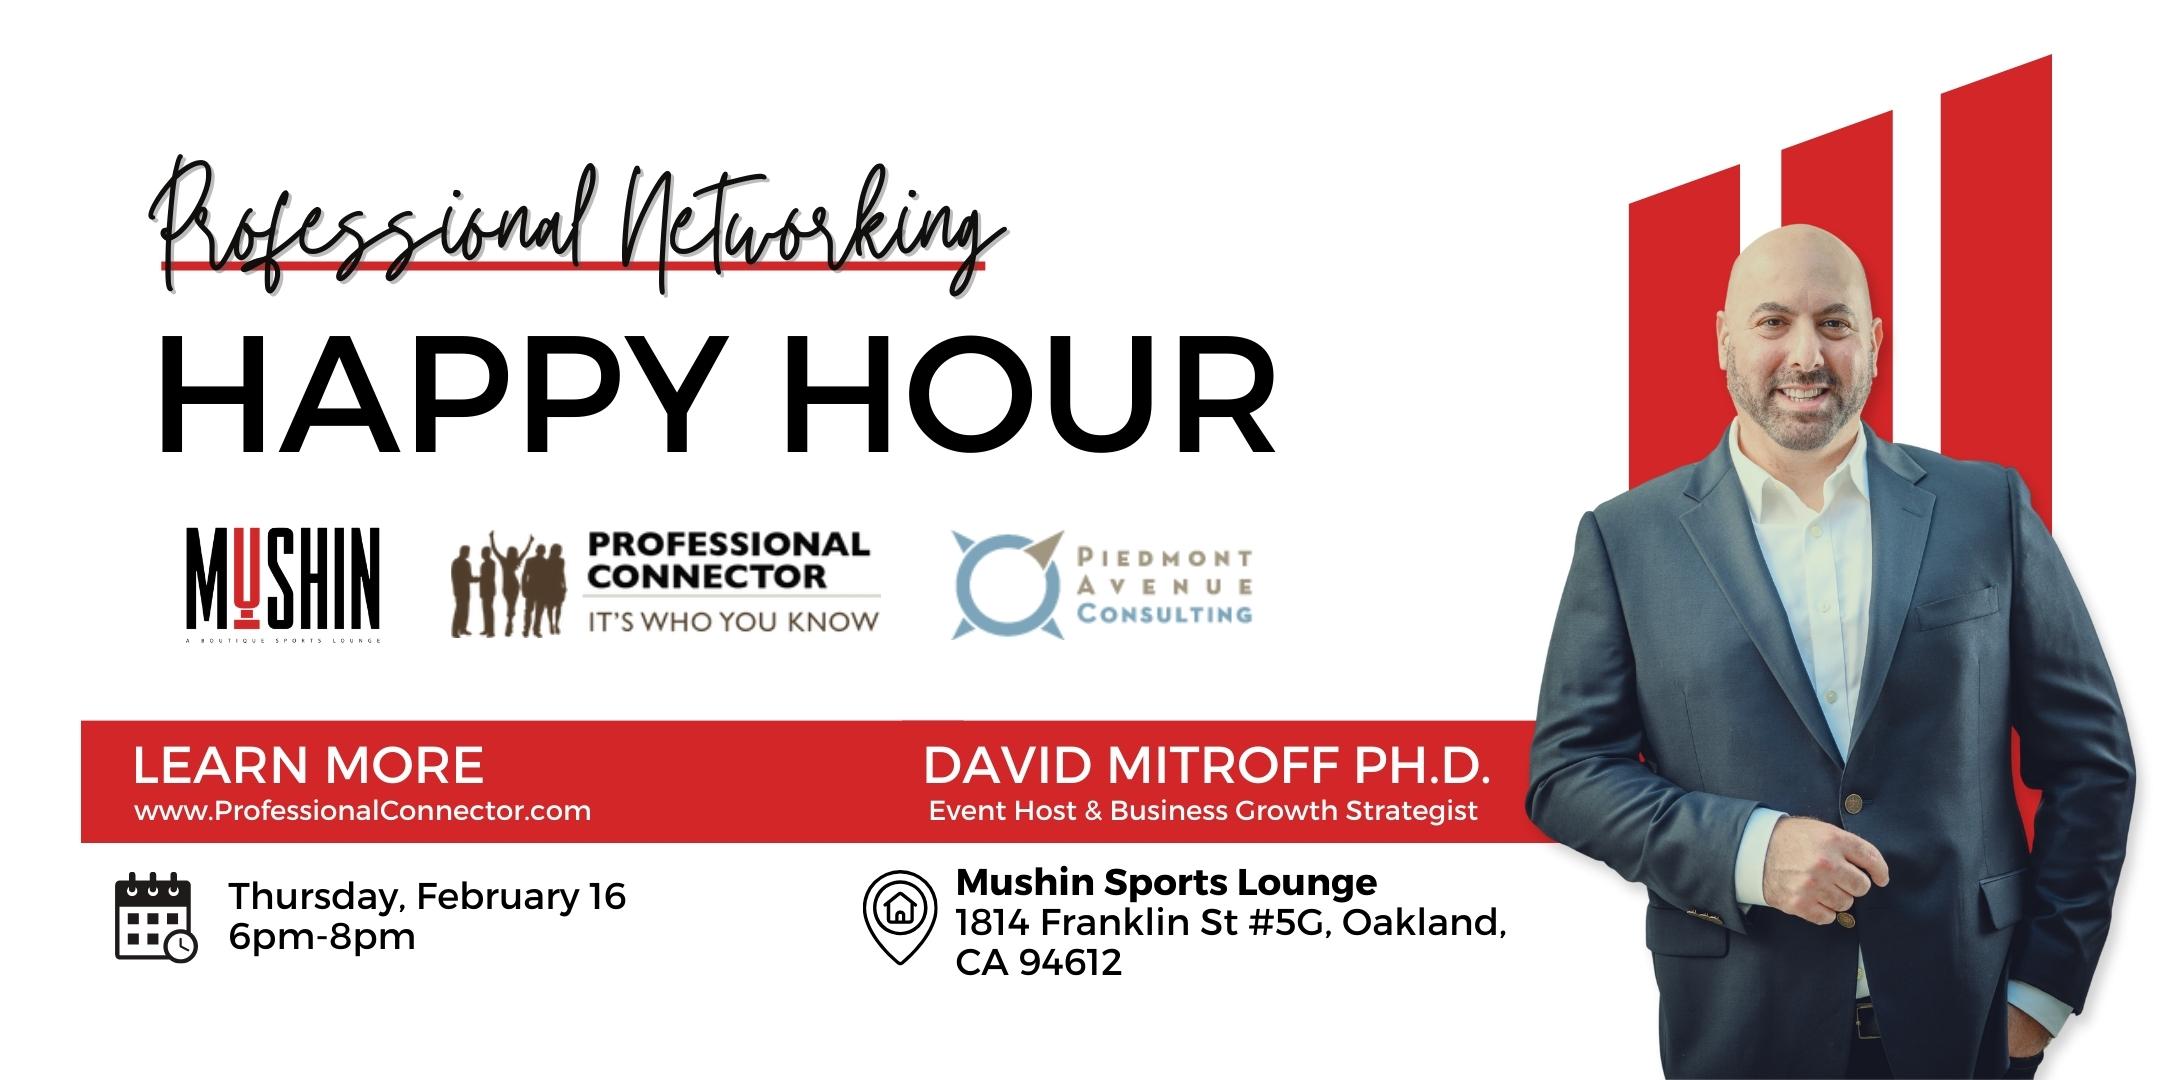 Bay Area Networking Happy Hour at Mushin Sports Lounge | Feb. 16, 2023